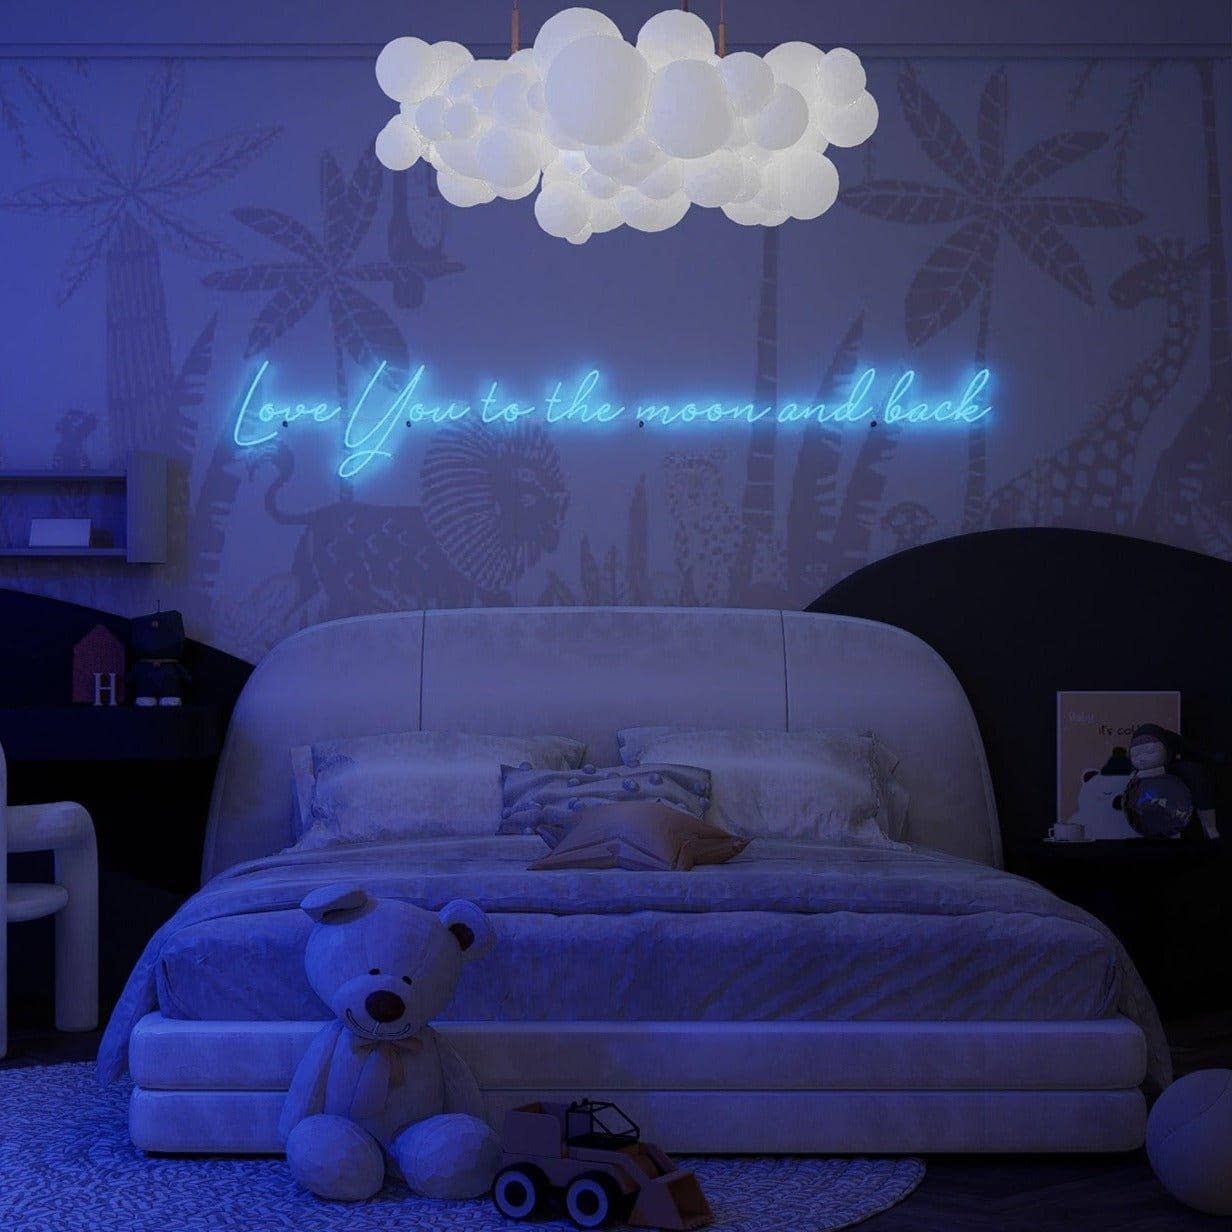 light-up-blue-neon-lights-and-hang-them-in-the-bedroom-for-display-at-night-love-you-to-the-moon-and-back